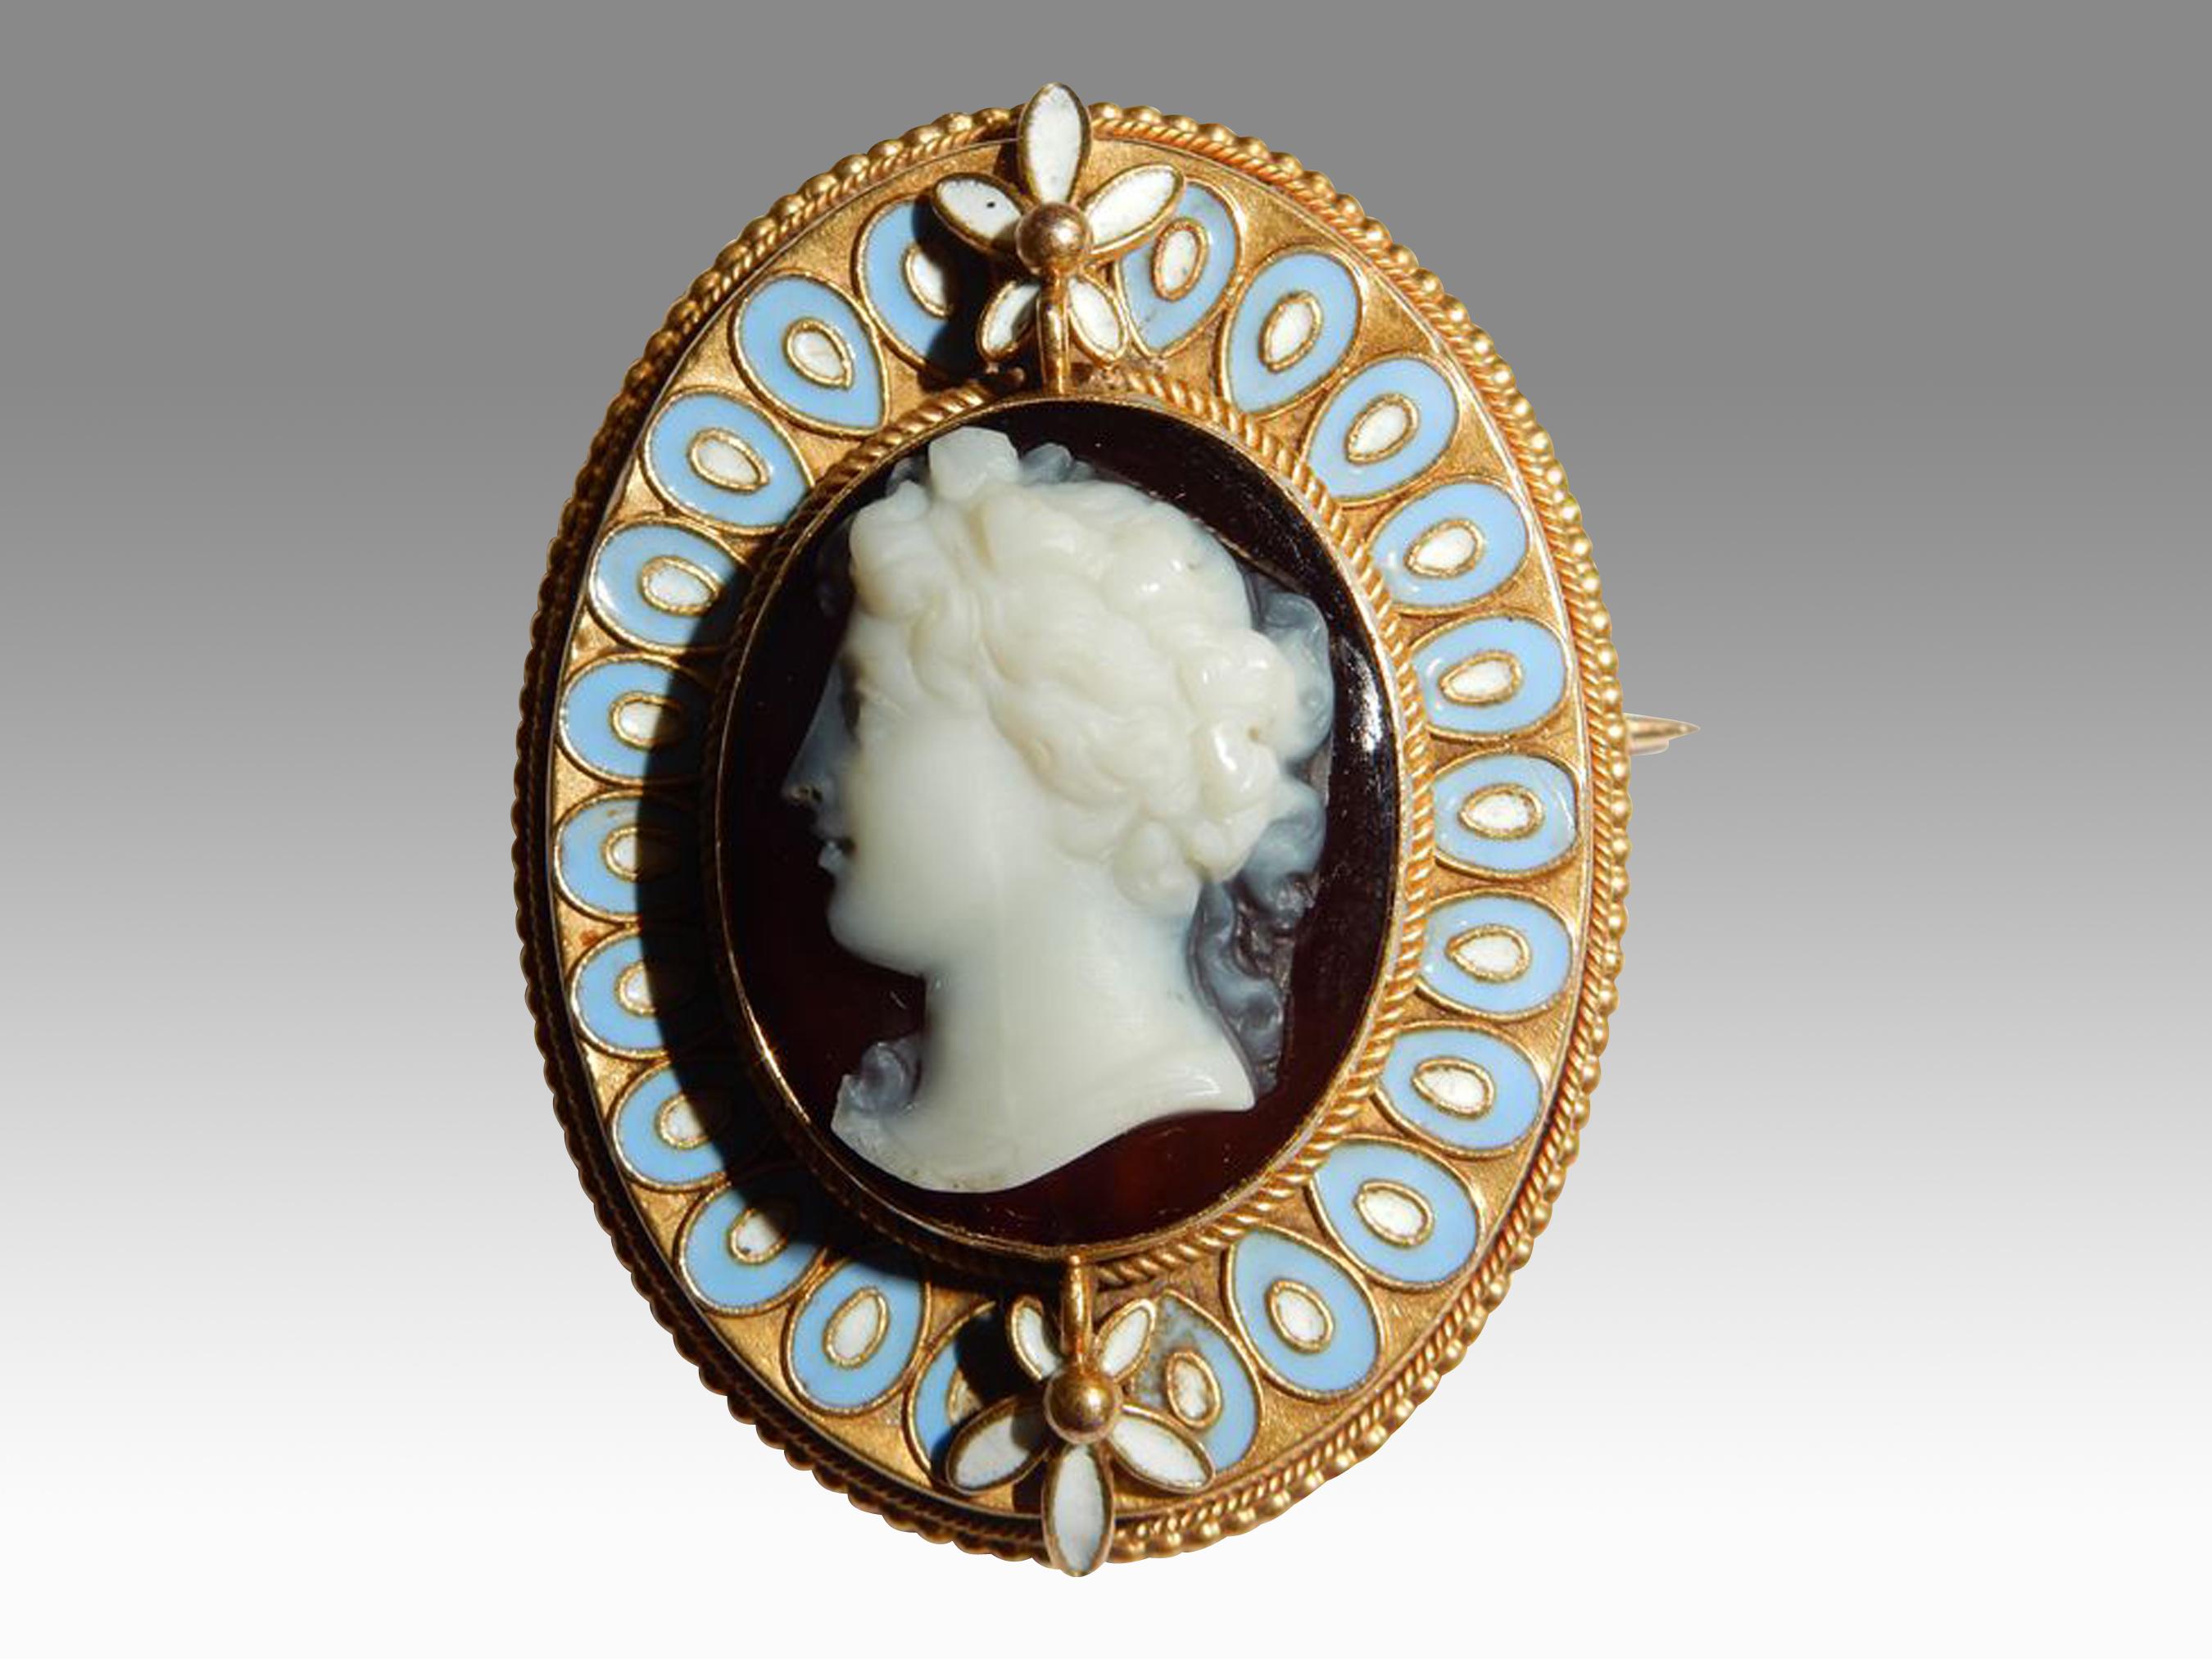 Important Exquisite Rare Antique Hardstone Gold & Enamel Cameo Brooch For Sale 1